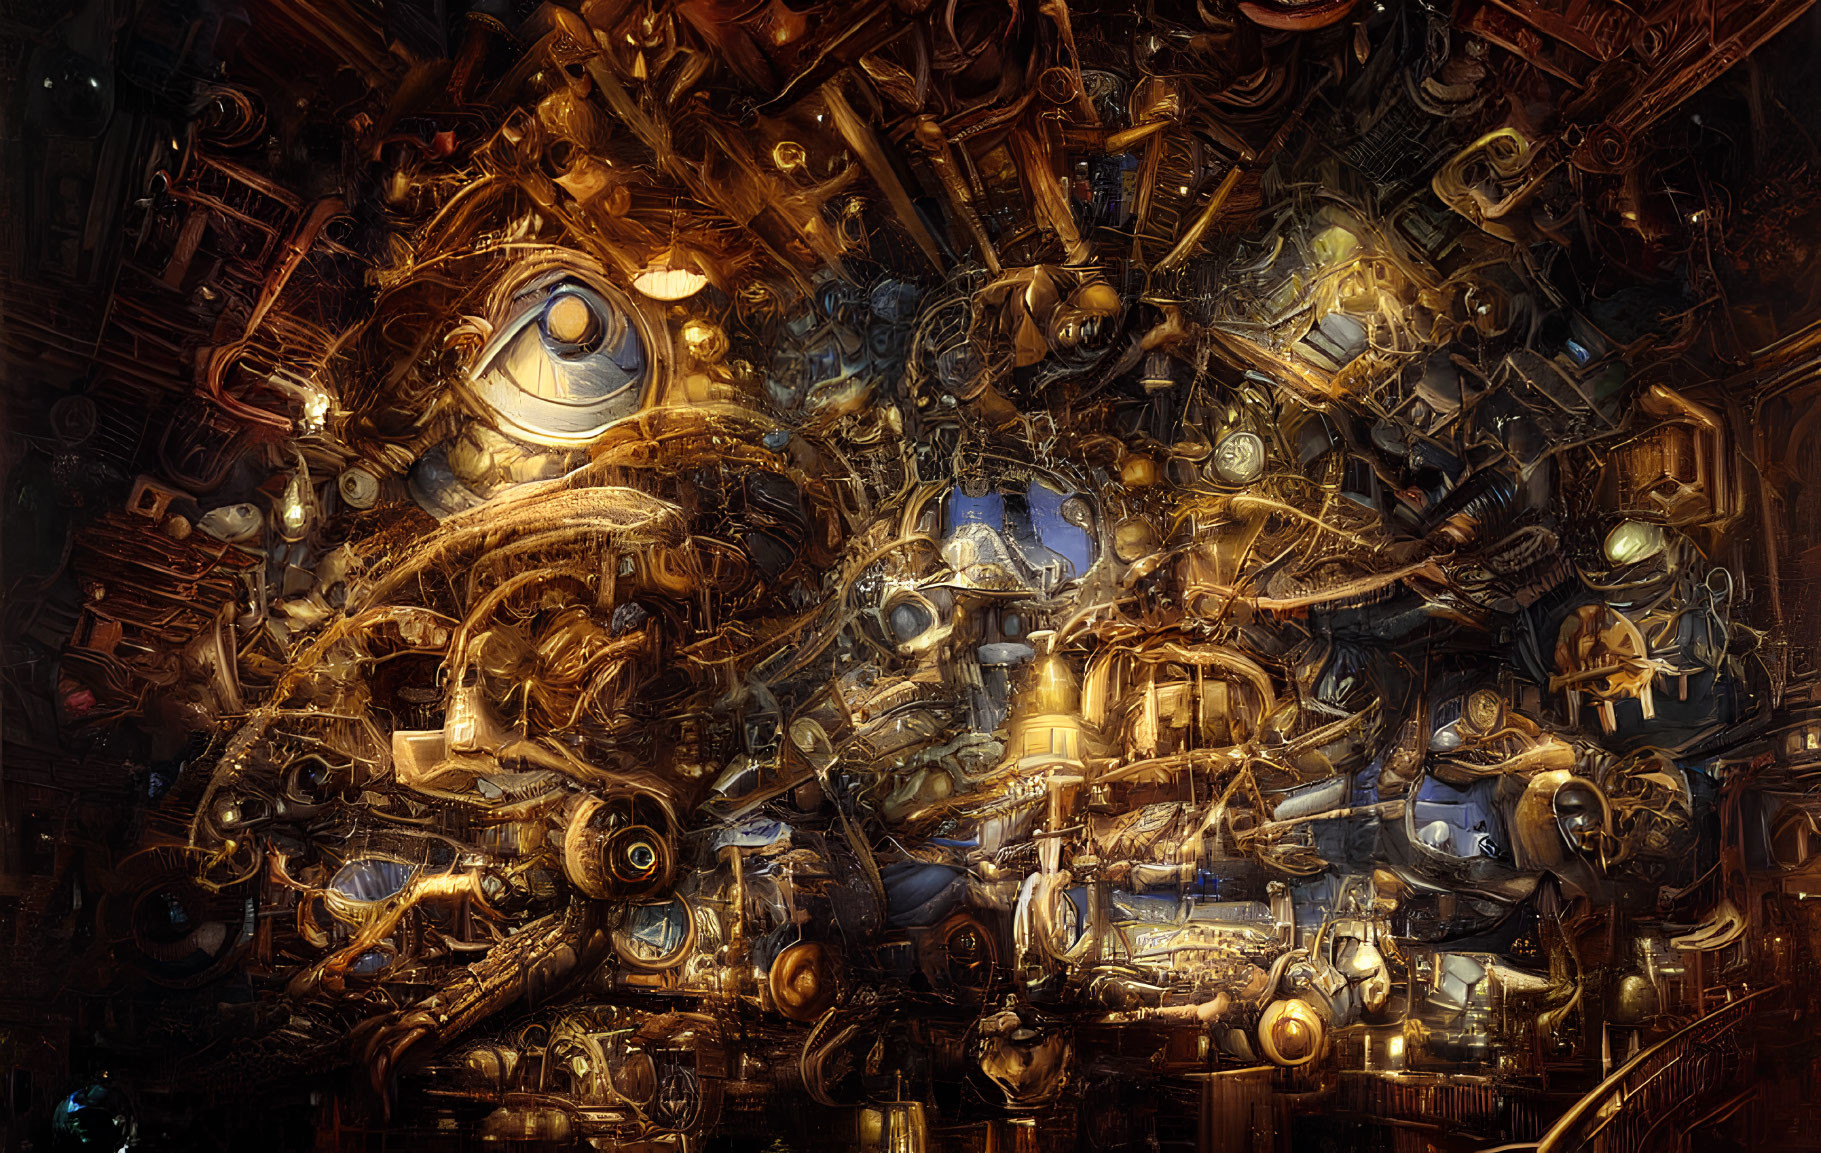 Detailed Steampunk Artwork with Mechanical Gears and Machinery